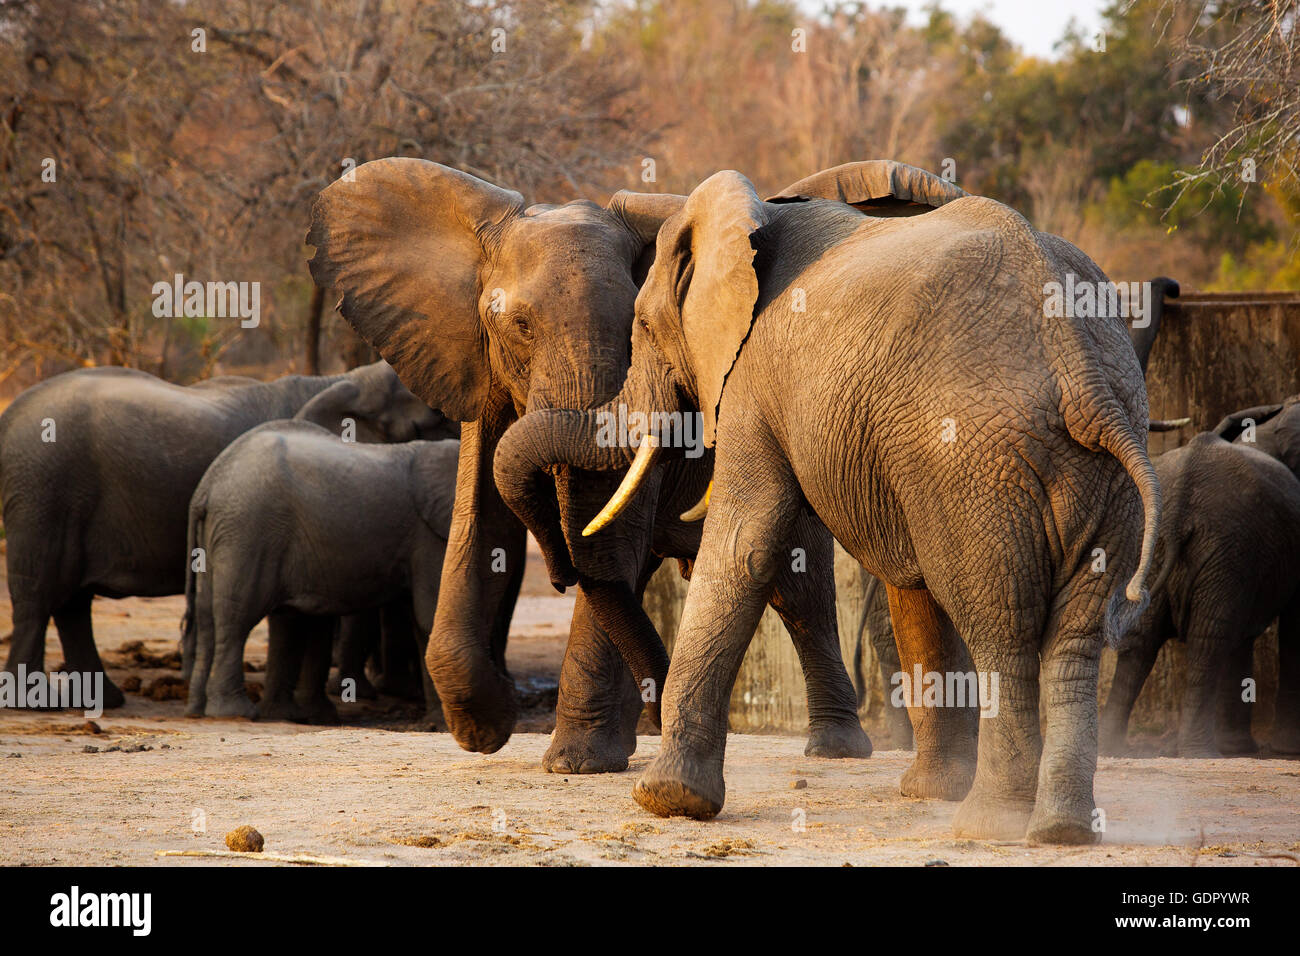 Elephants having a argument in the Kruger National Park, South Africa. Stock Photo